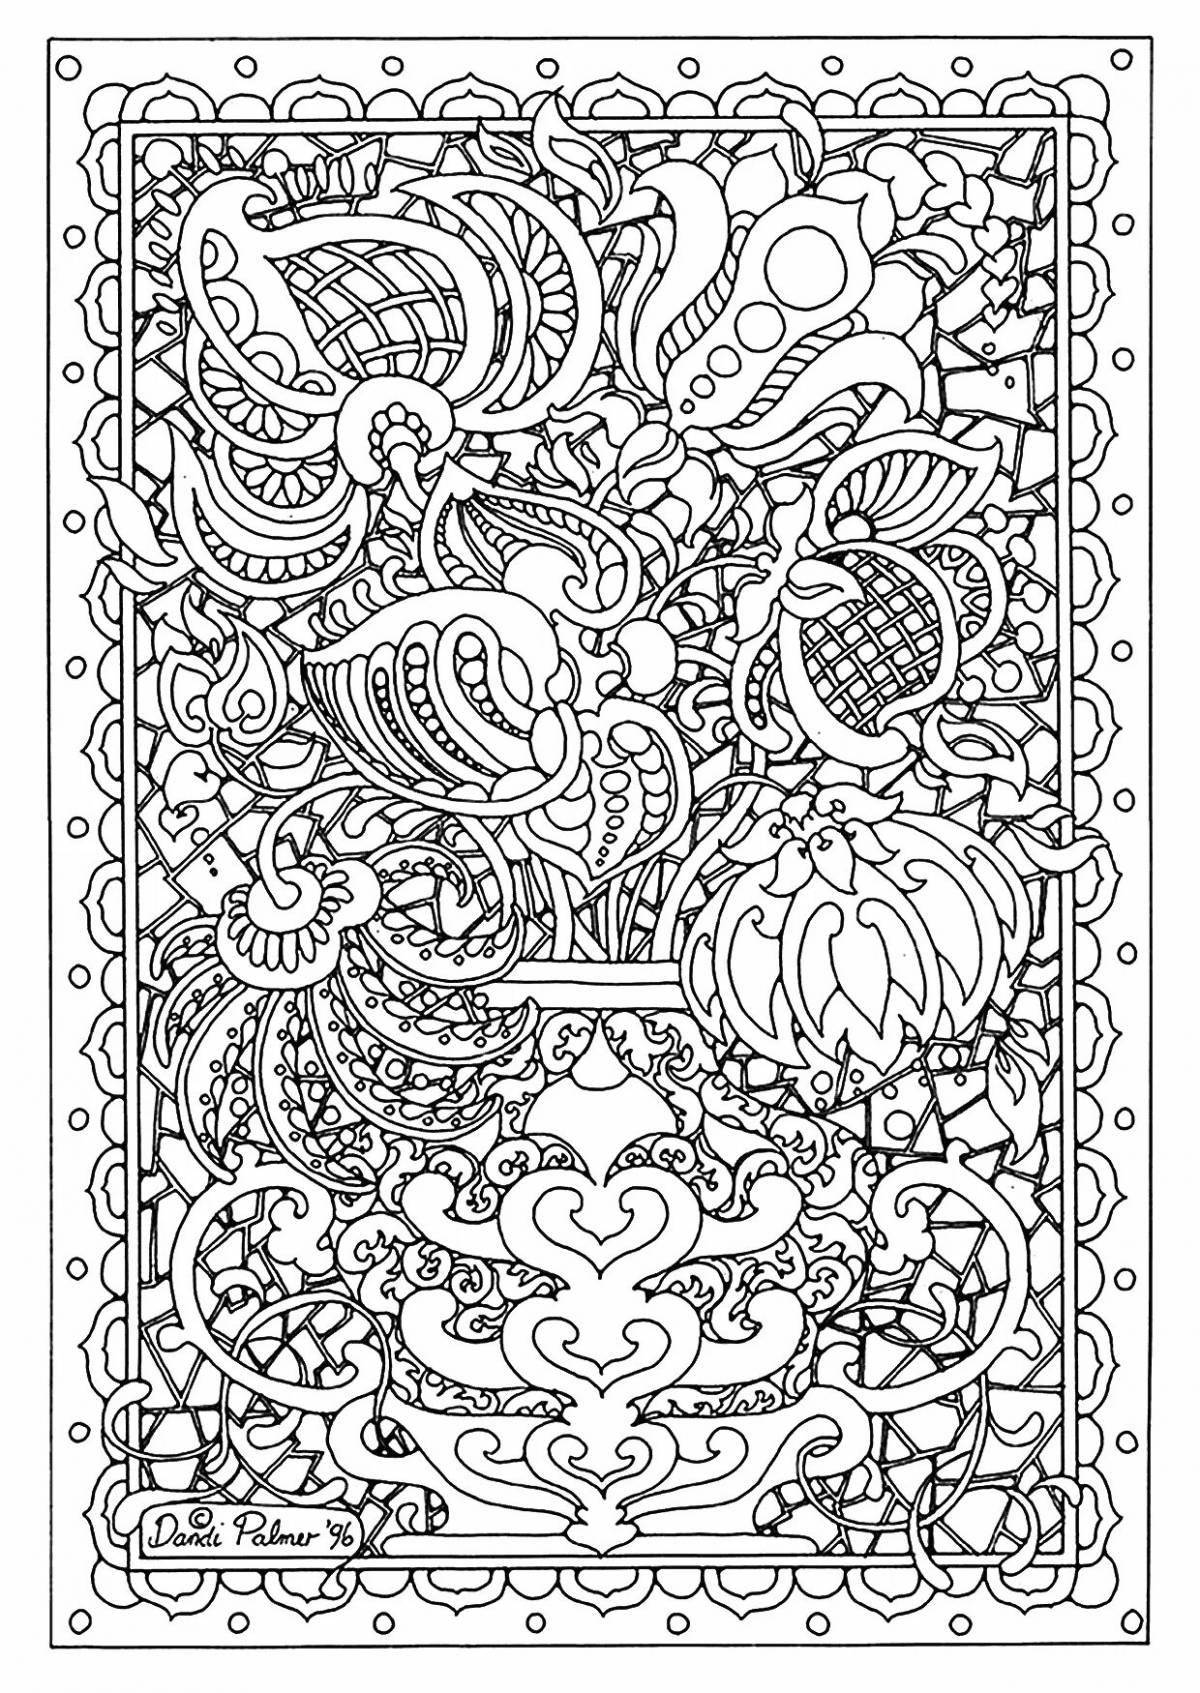 Coloring page with intricate patterns - detail